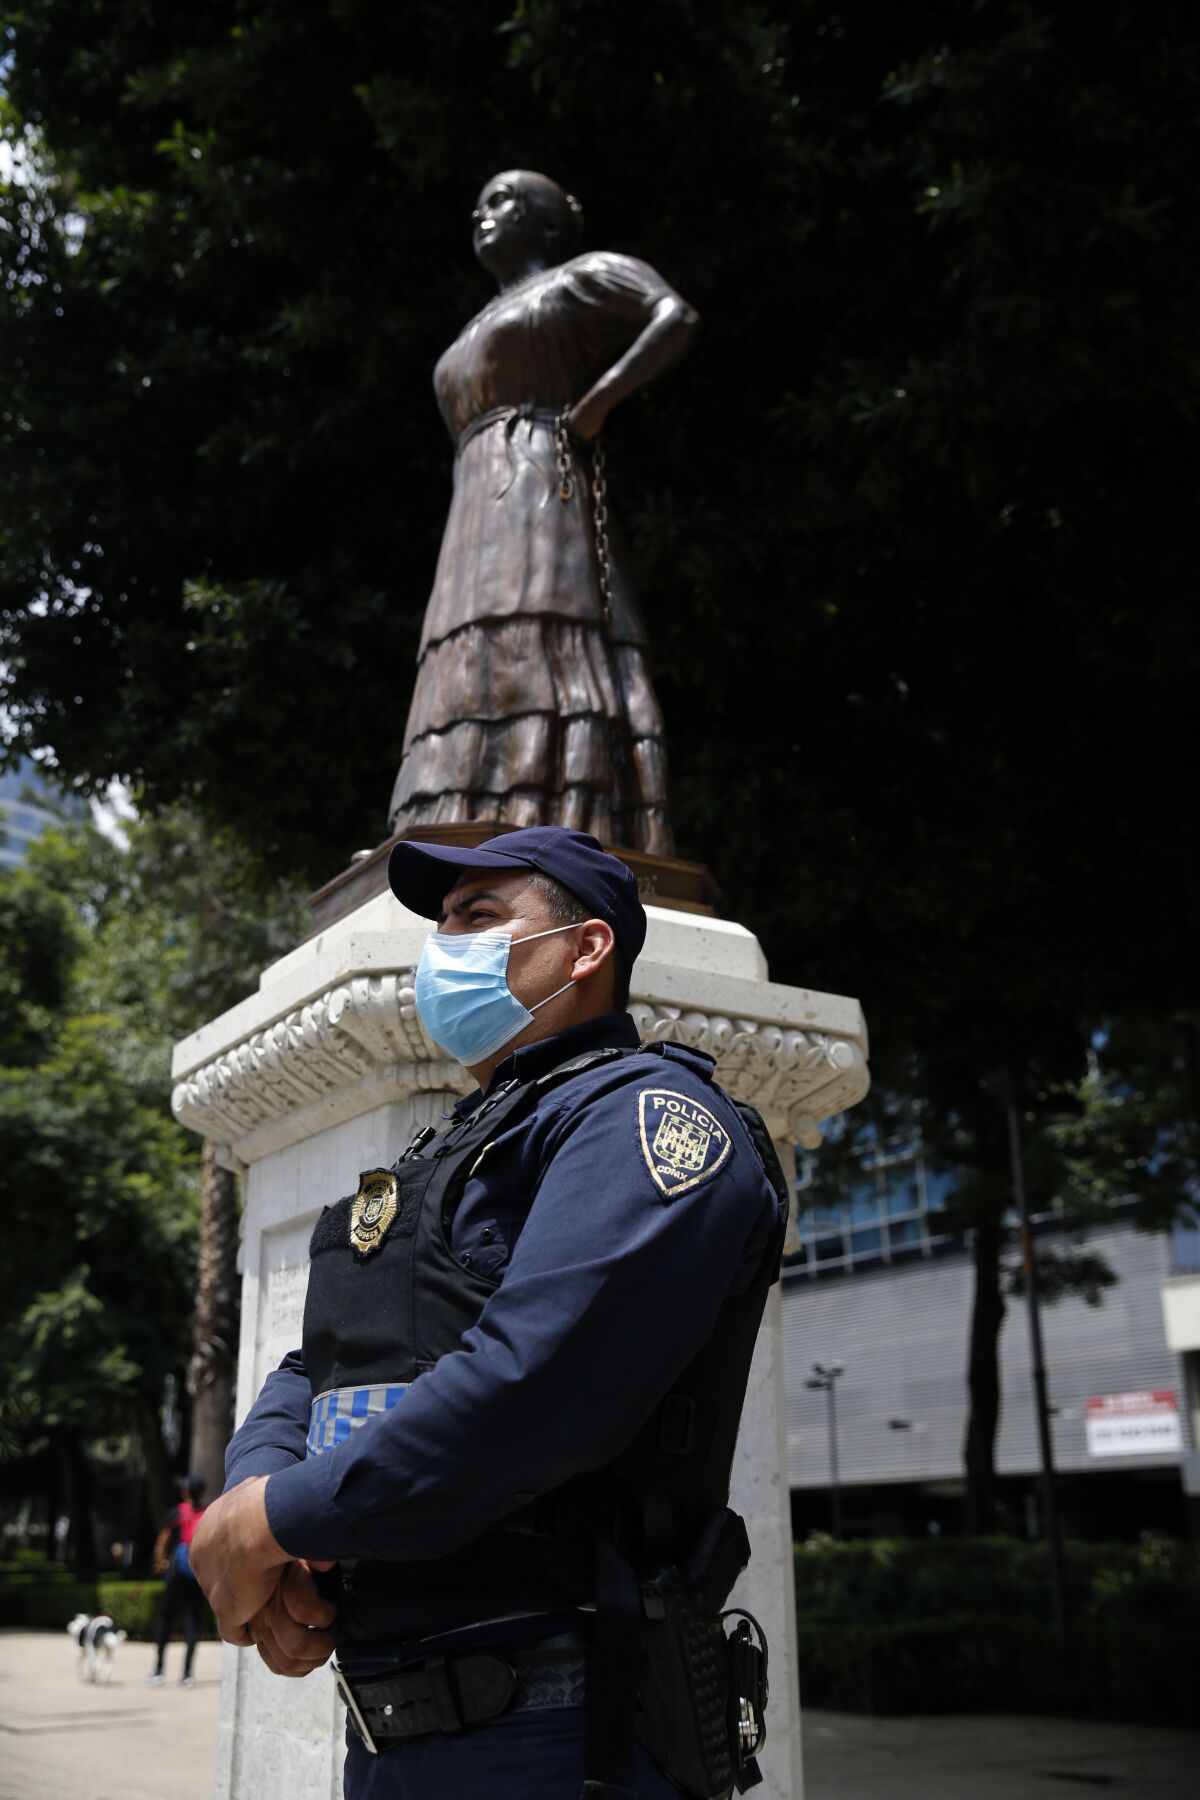 A police officer stands guard near a statue of independence heroine Leona Vicaria on Paseo de la Reforma in Mexico City, Sunday, September 13, 2020. Mexico will celebrate its day of Independence from Spain on September 16. (AP Photo/Marco Ugarte)